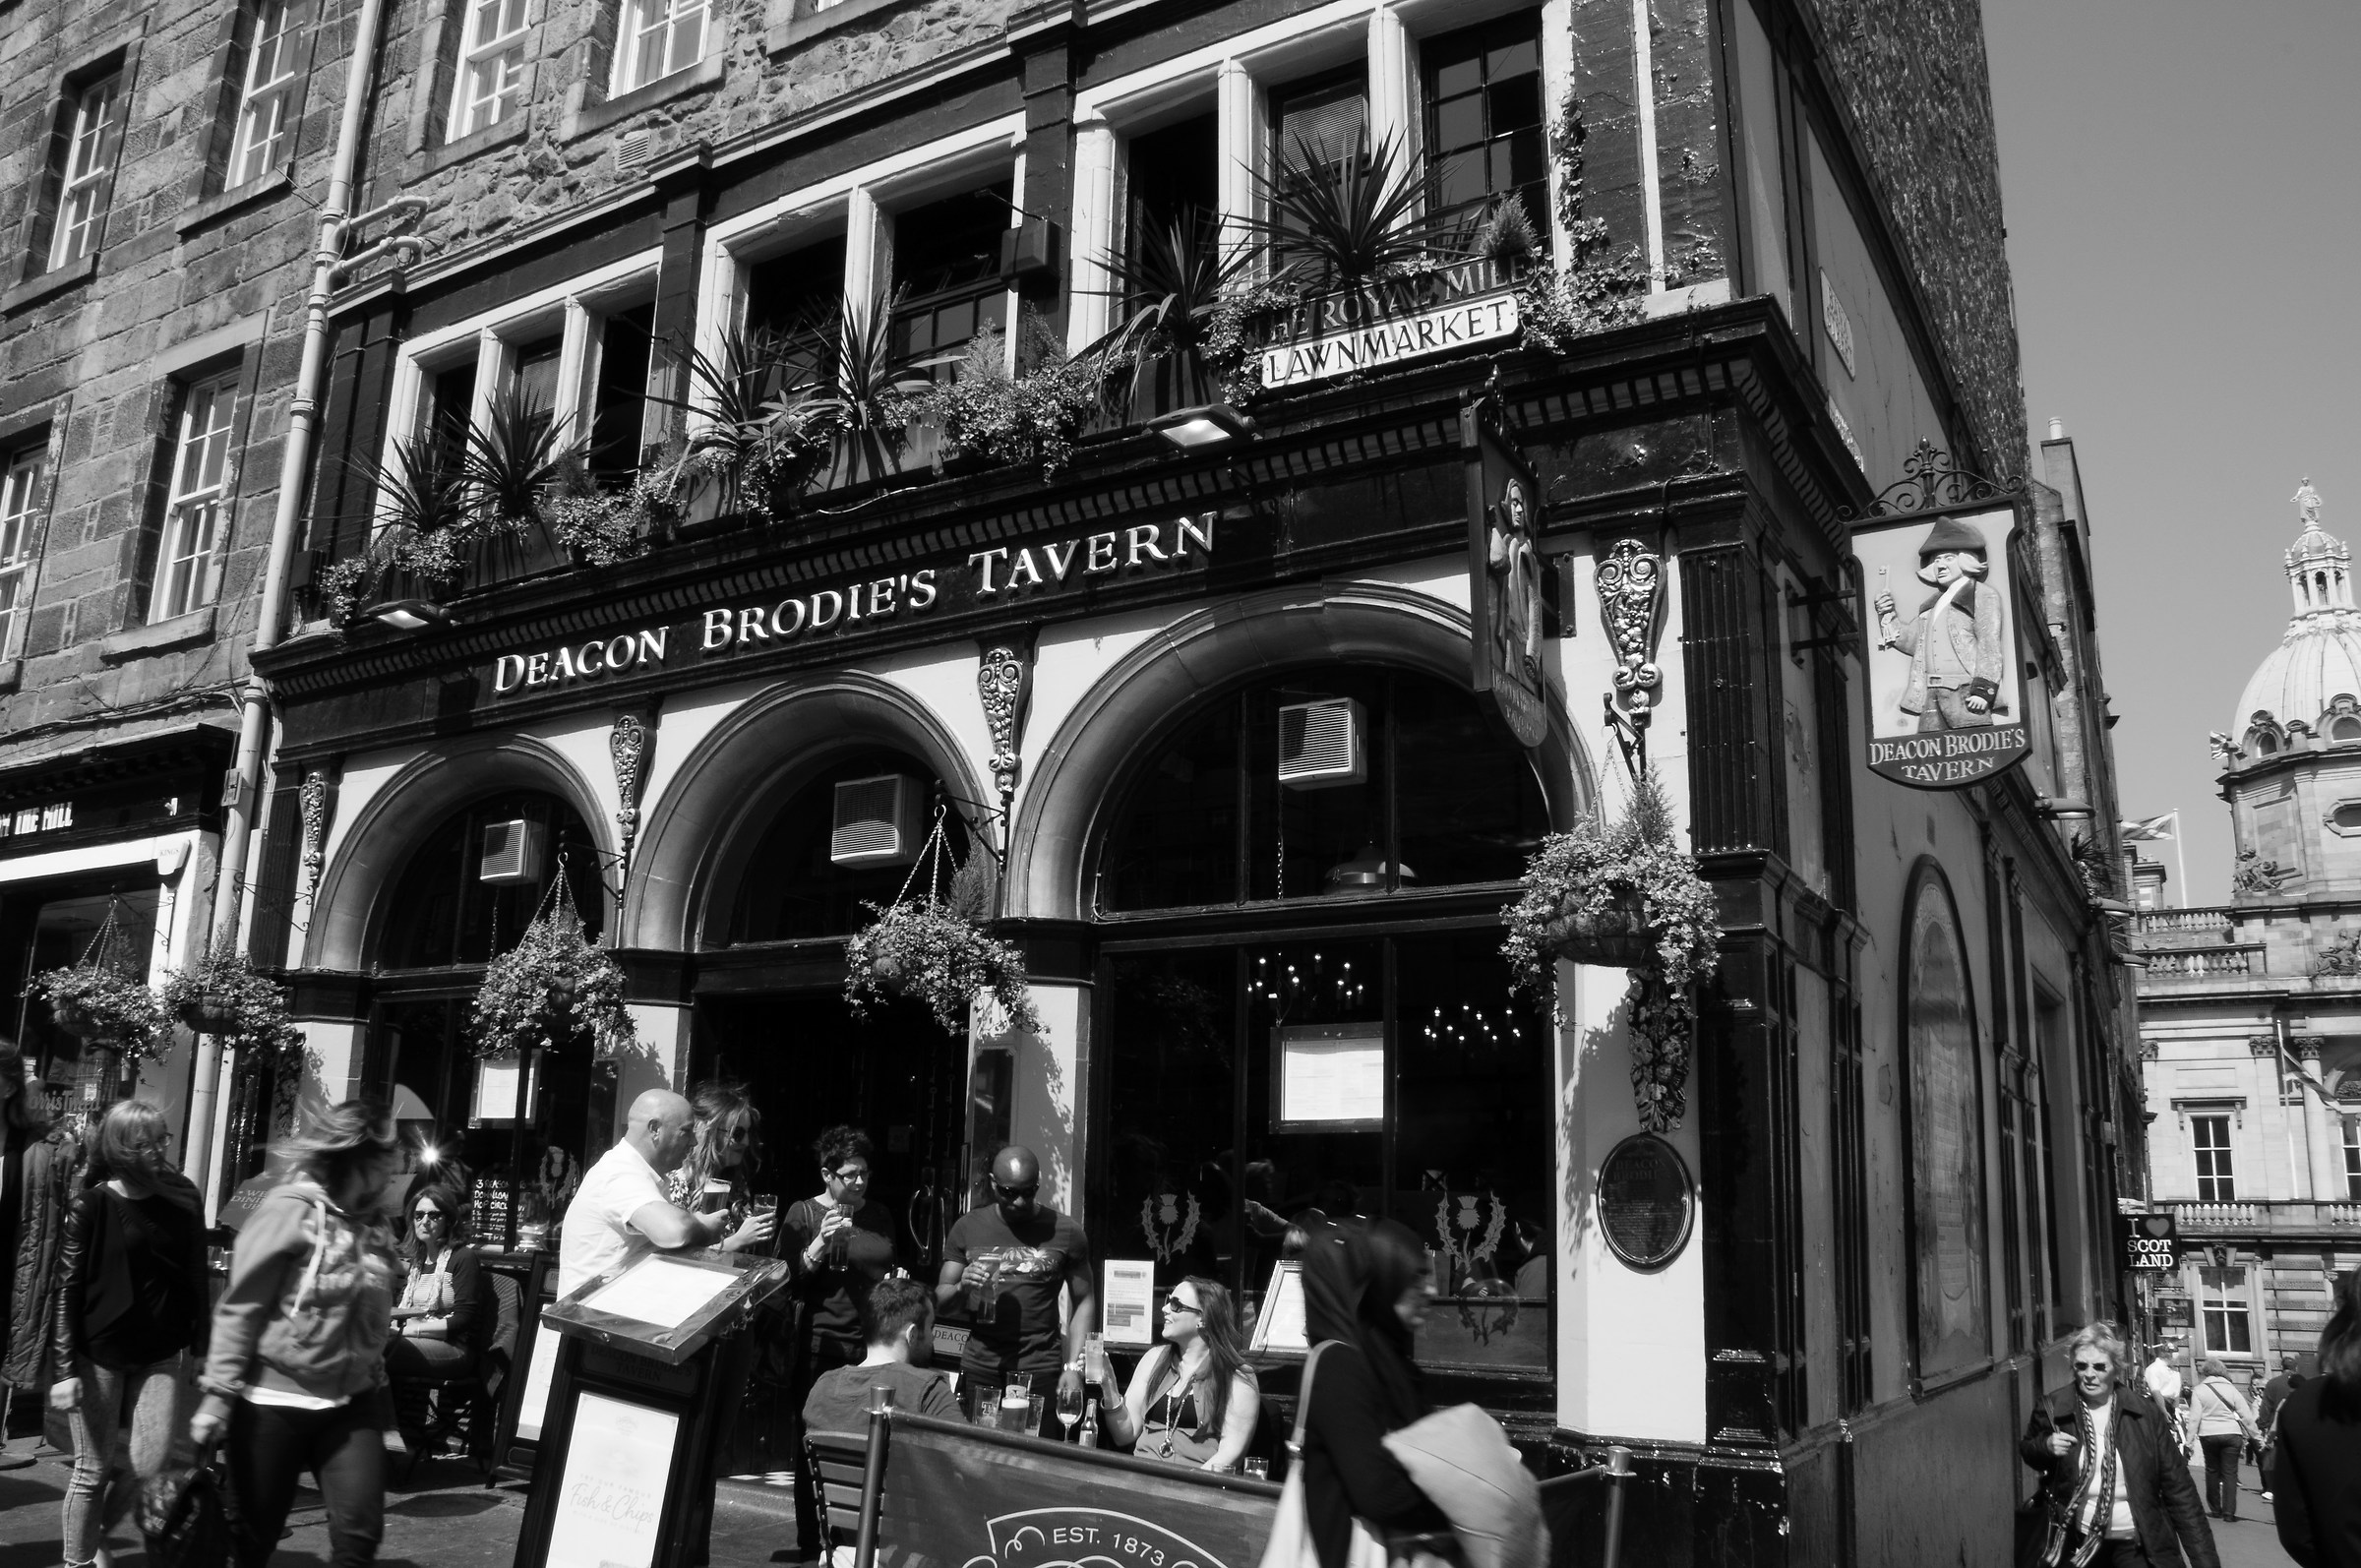 one of the oldest pubs in Edinburgh...